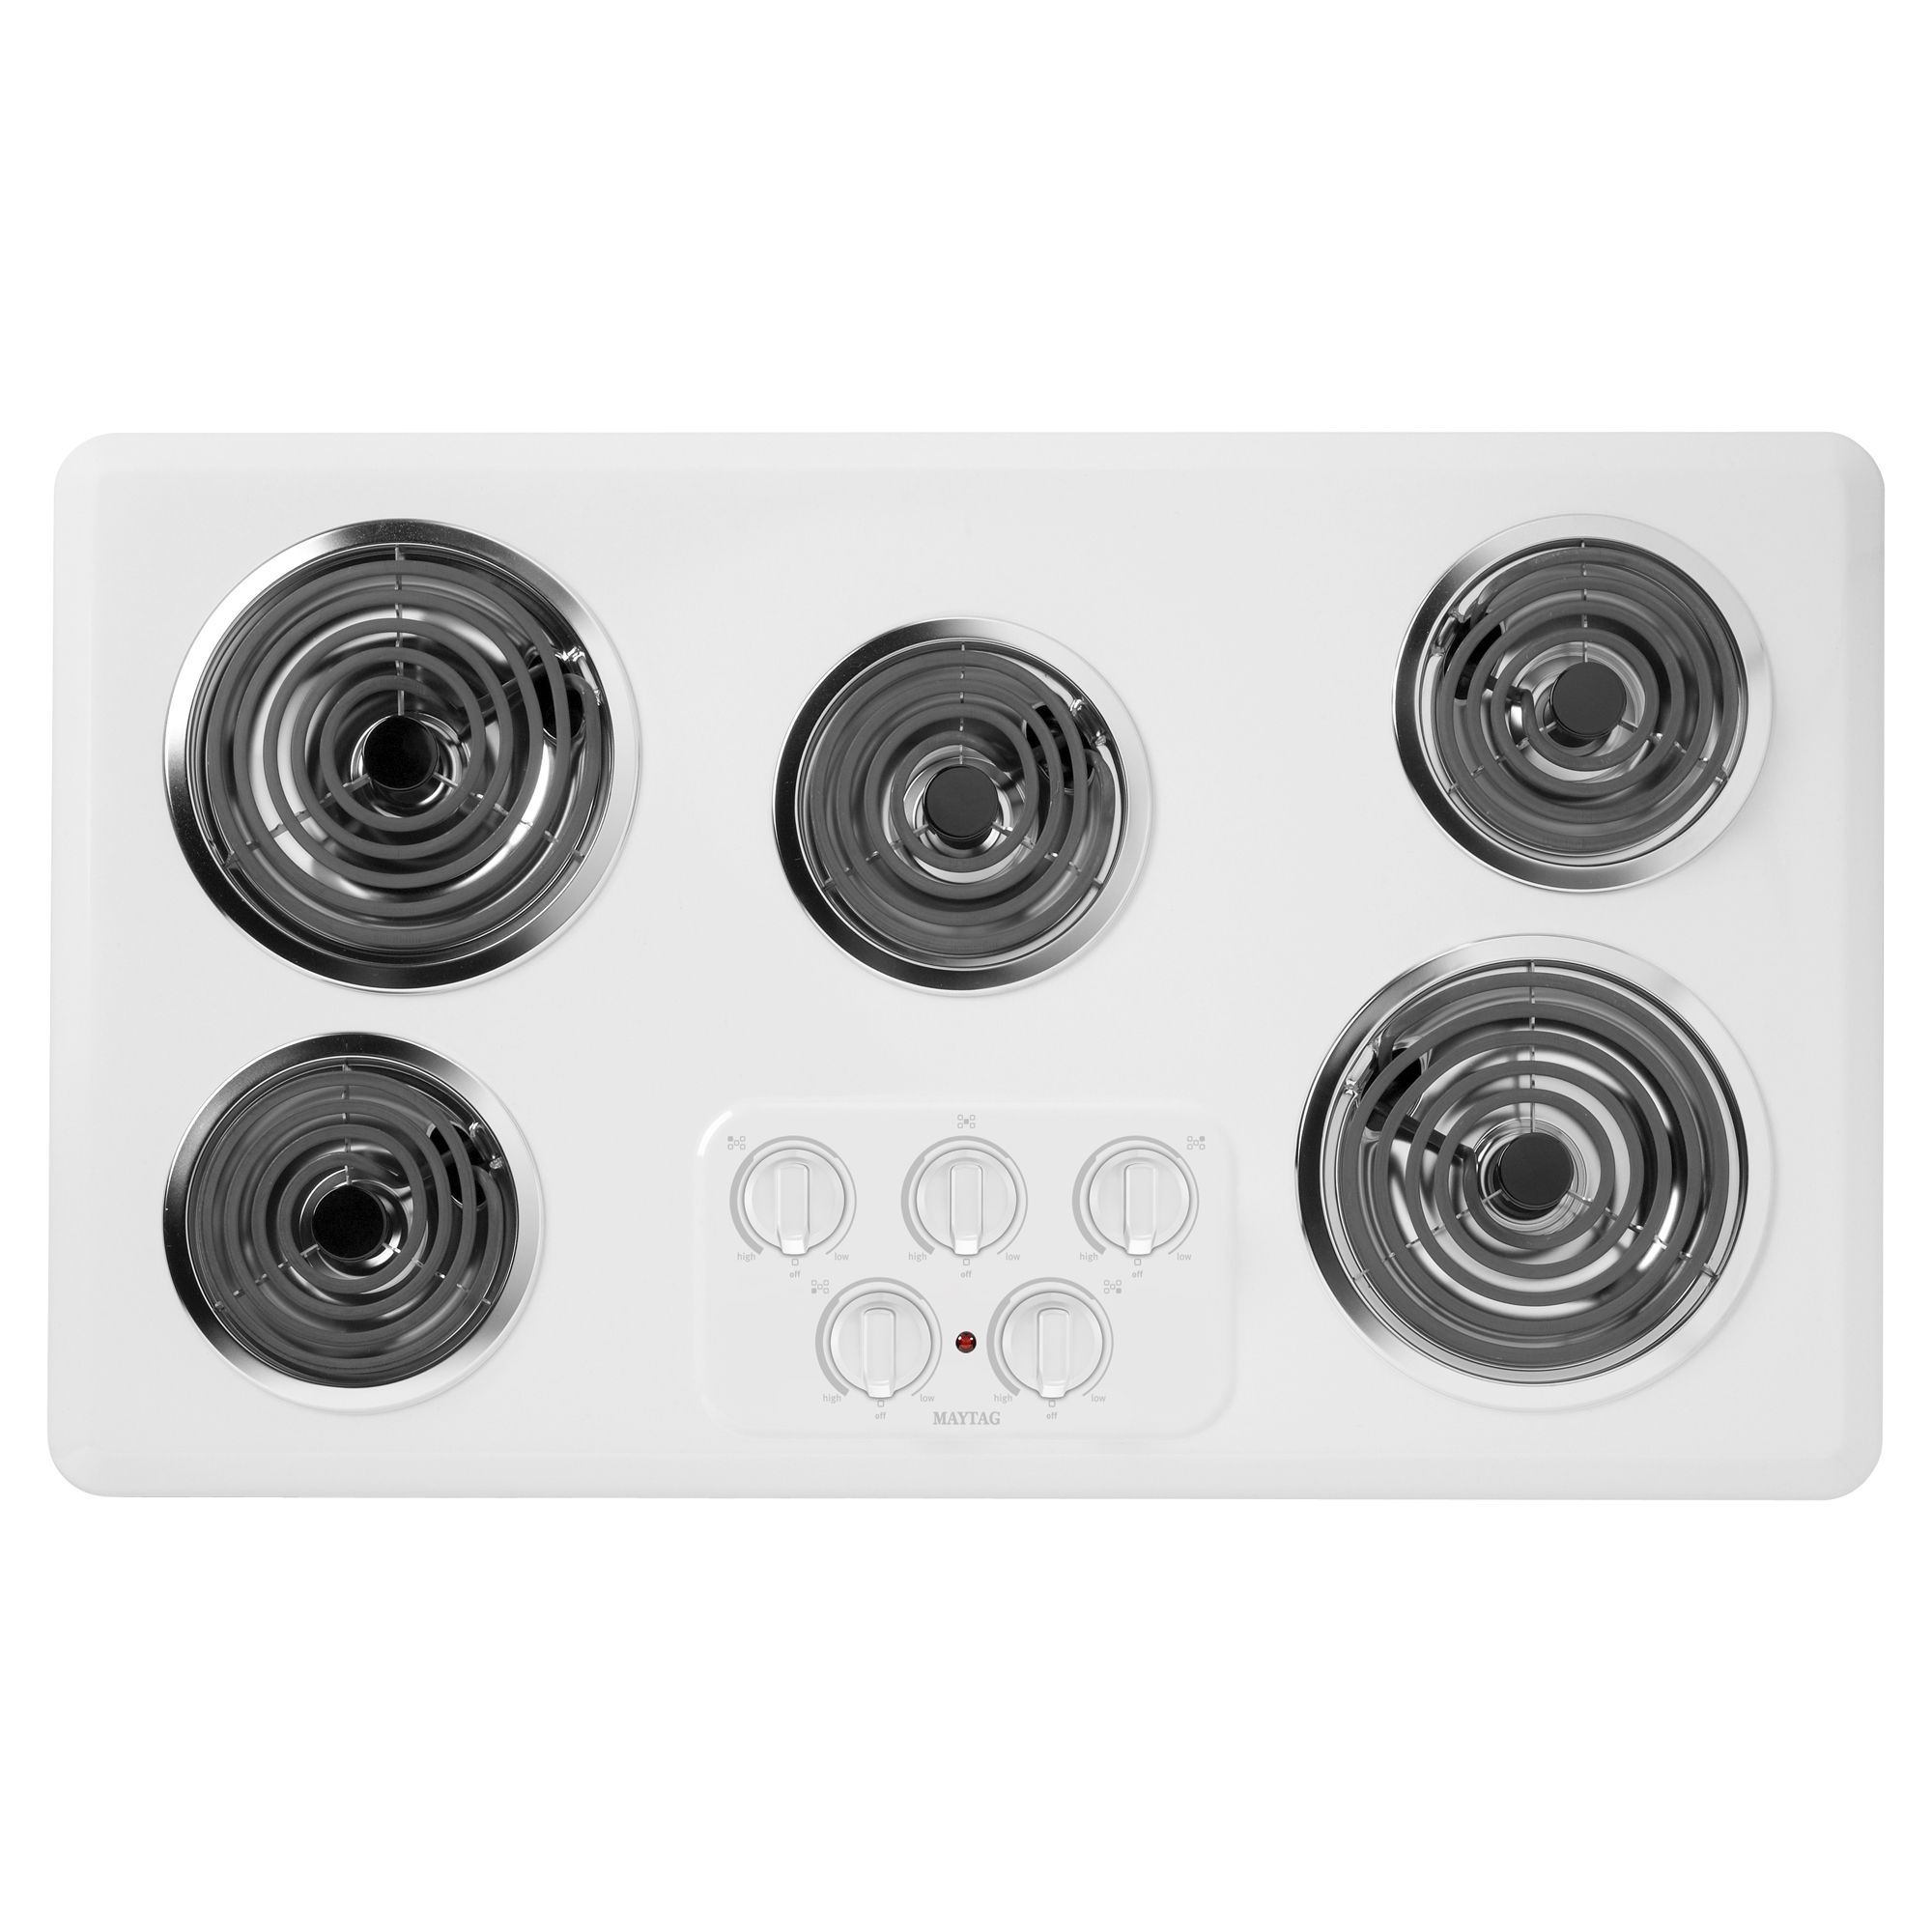 36" Electric Built-In Coil Cooktop logo